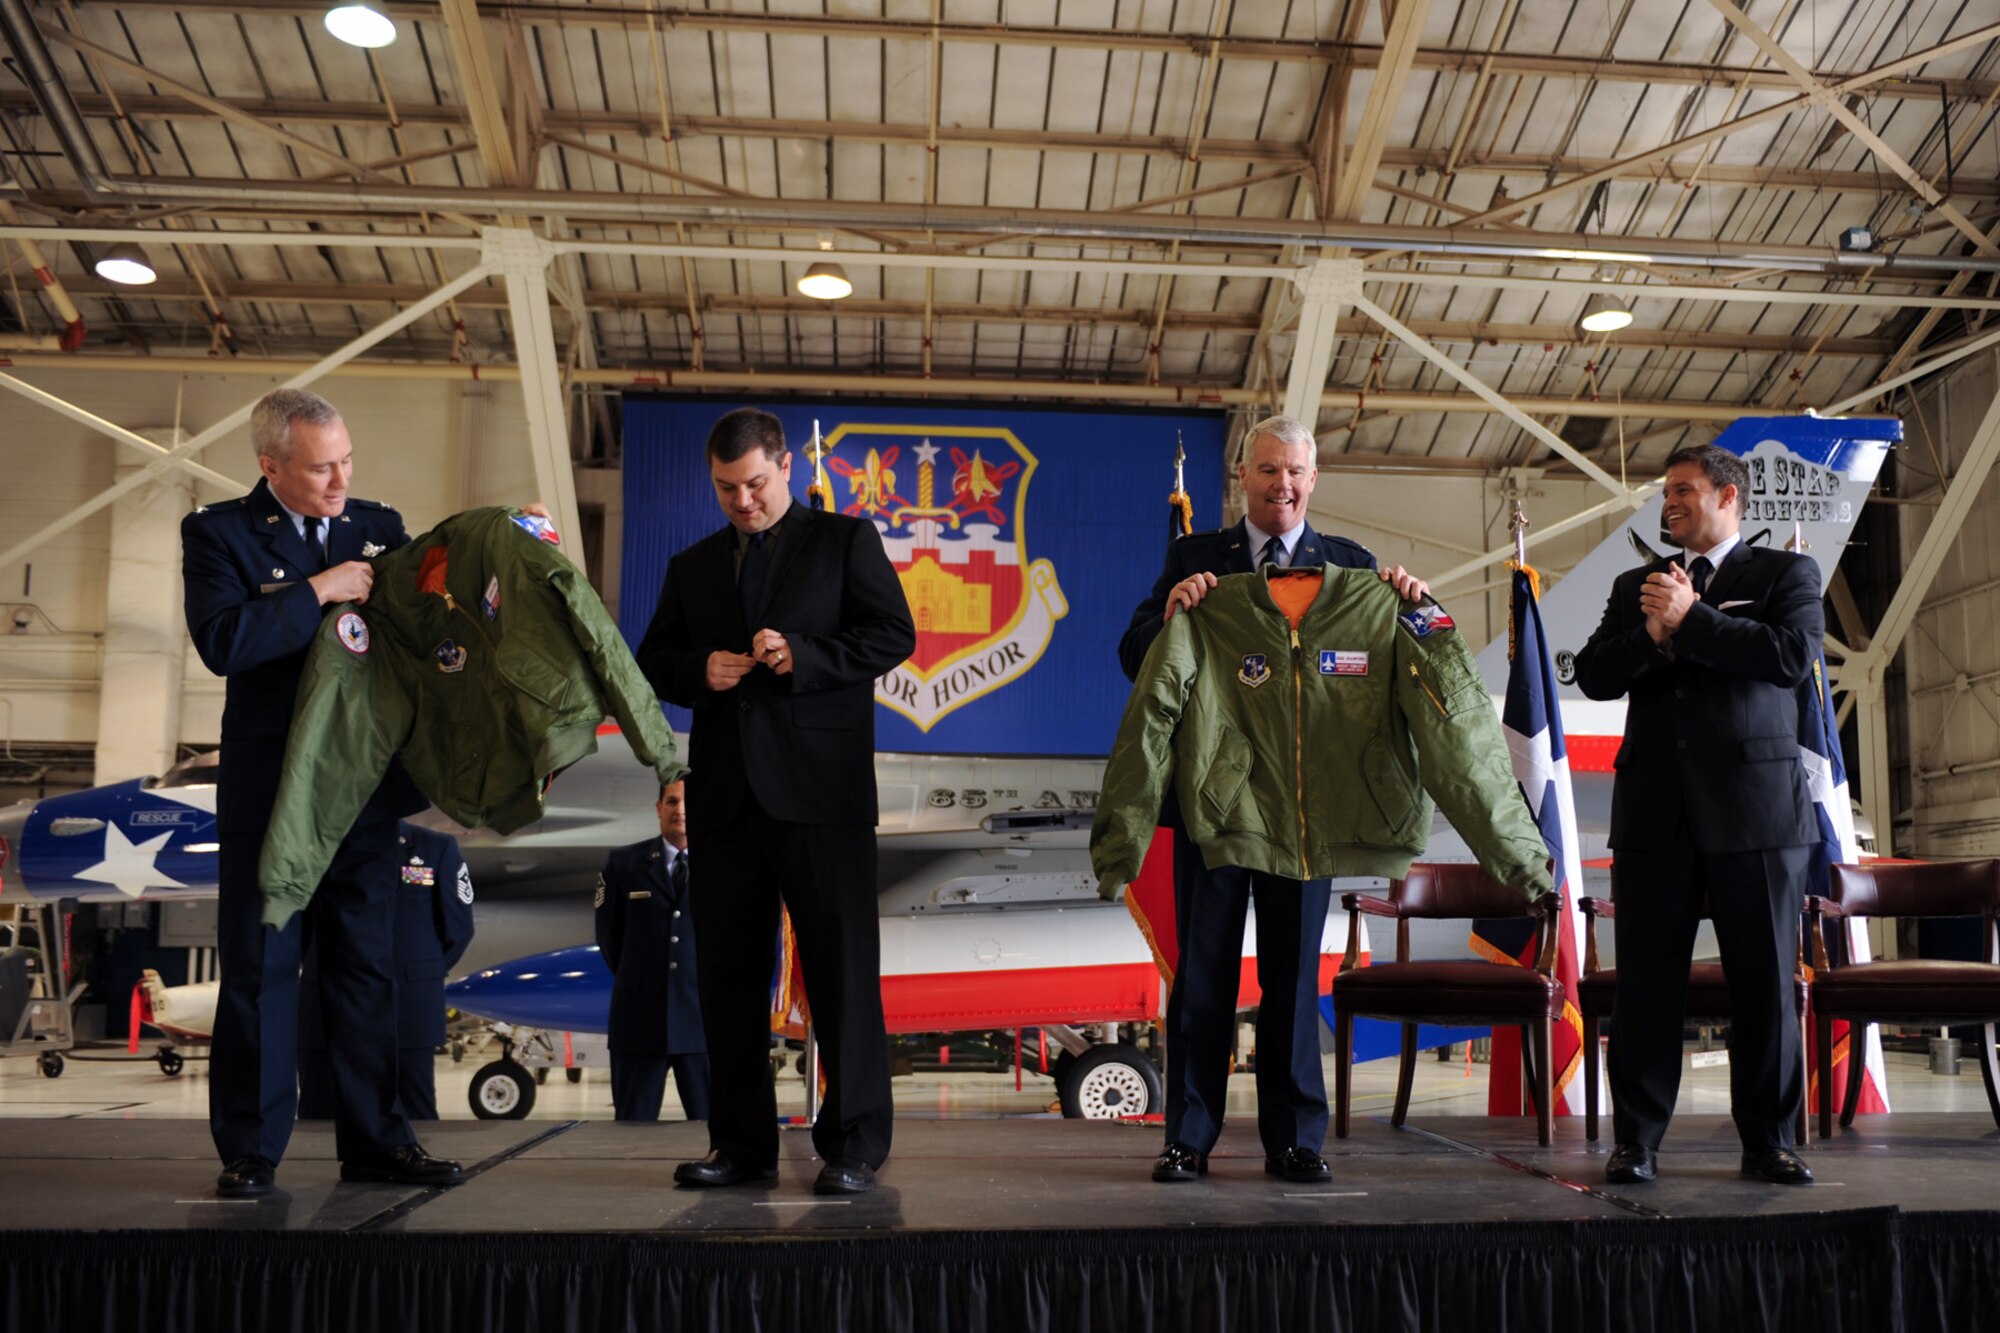 Cols. John Kane (left) and Michael Kelley (second from right), commander and vice commander of the 149th Fighter Wing, respectively, welcome Jason Lohe (second from left) owner and chief executive officer, and Cree Crawford (right), president and chief operating operator, both of the San Antonio Talons professional arena football team, as ?Honorary Commanders? of the Texas Air National Guard unit at Lackland Air Force Base, Texas, Feb. 11, 2012. (National Guard photo by Staff Sgt. Eric Wilson / Released)